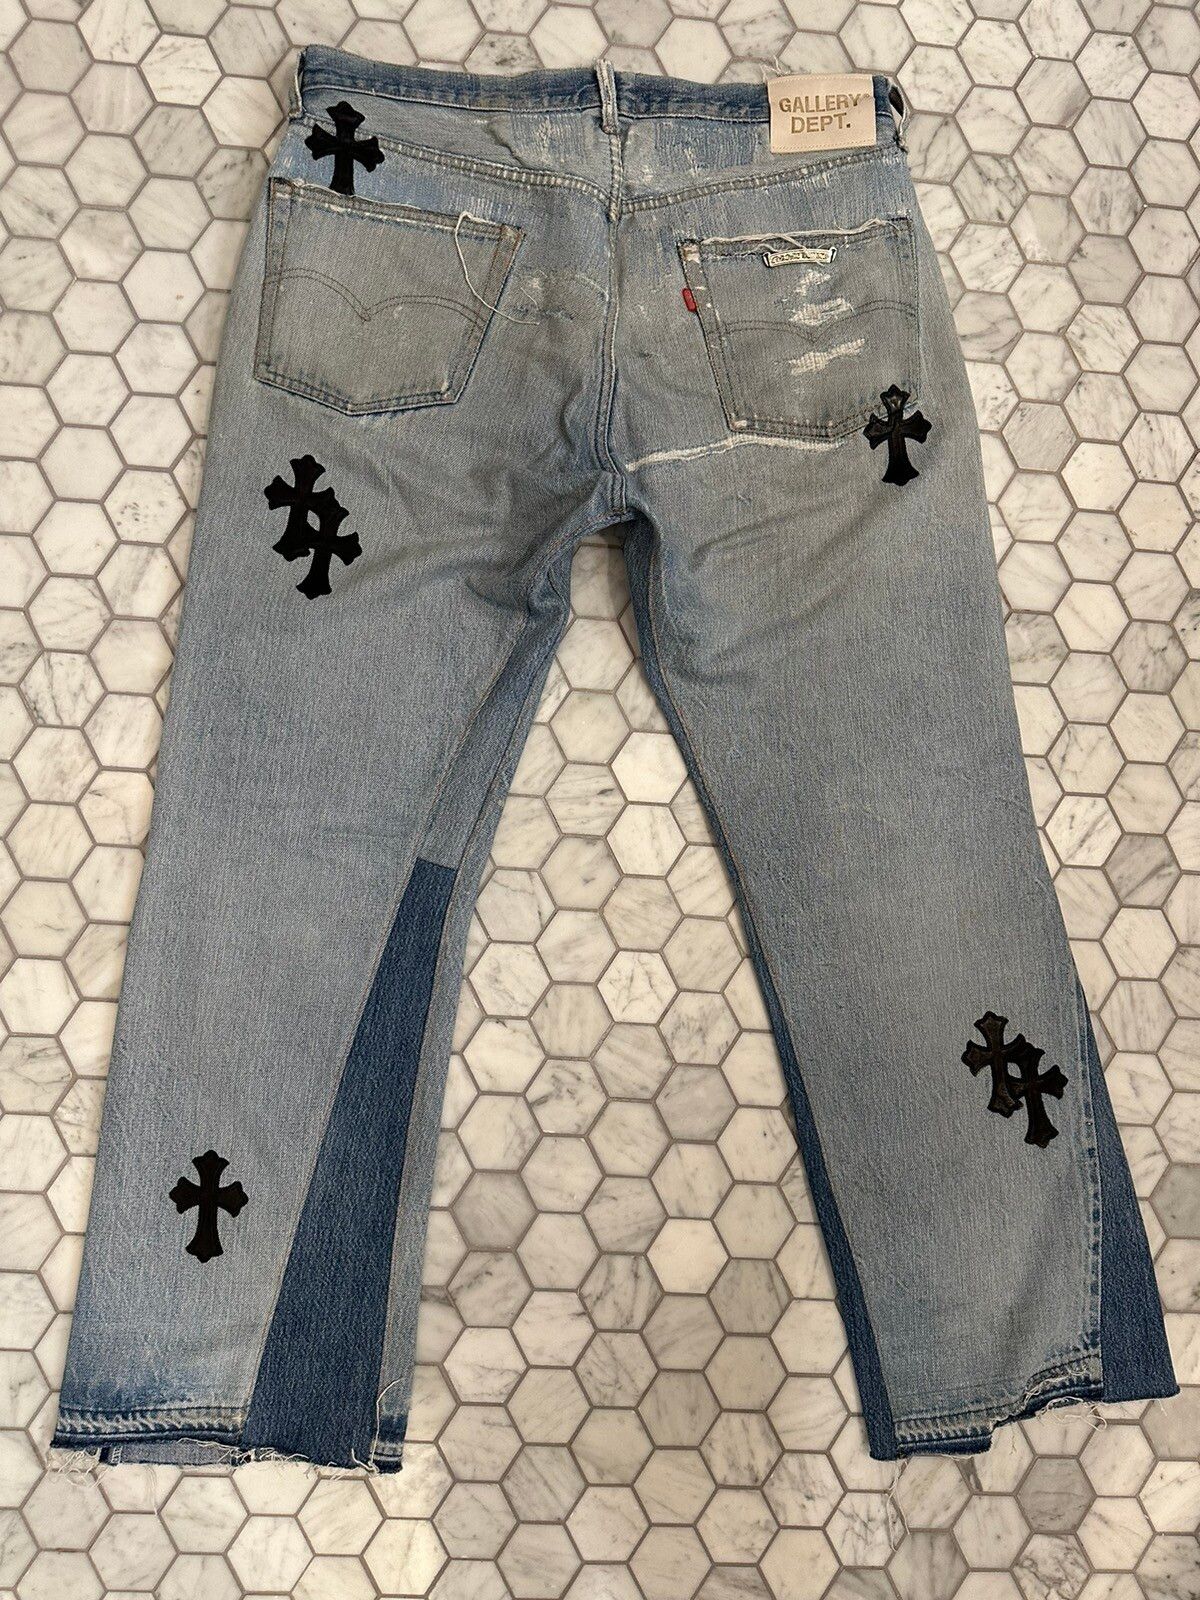 Chrome Hearts 1 of 1 Thrashed Chrome Hearts x Gallery Dept Patchwork Denim  | Grailed